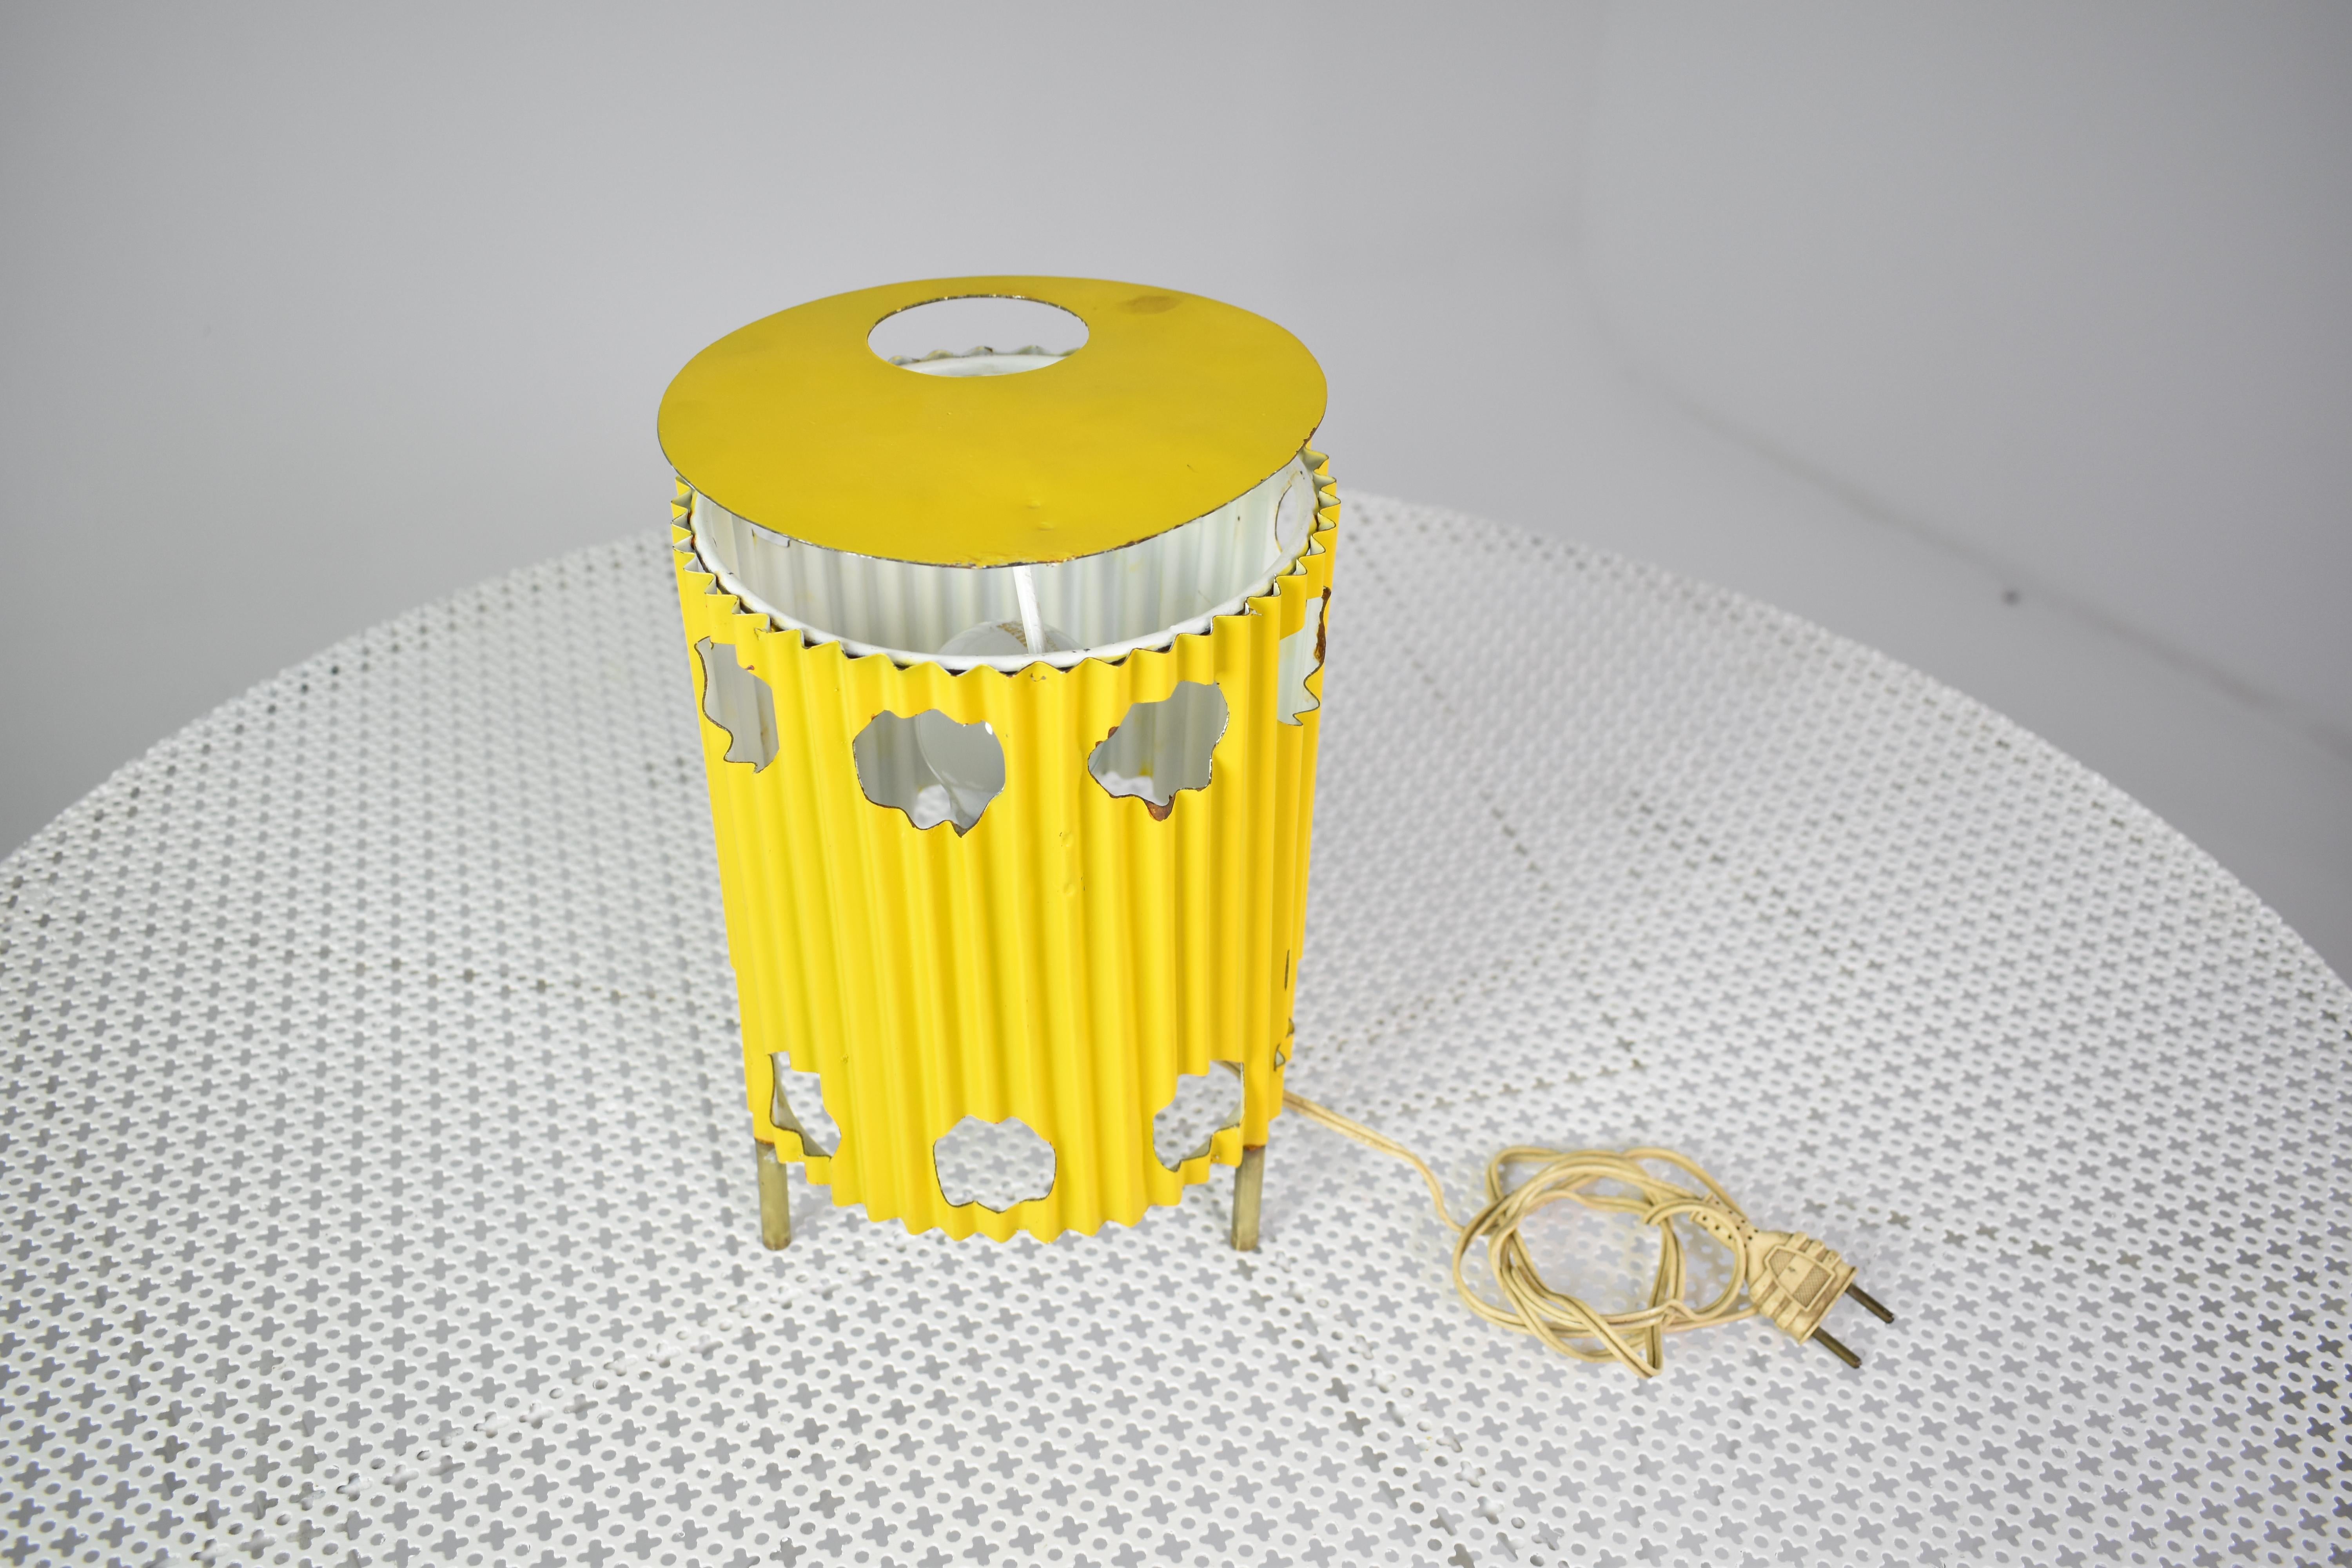 The highly collectible yellow 'Java' lamp, circa 1953, embodies Mathieu Matégot's artistic innovation, featuring pleated and perforated painted sheeted metal atop elegant brass tripod legs. Like a work of art, its striking design plays with light